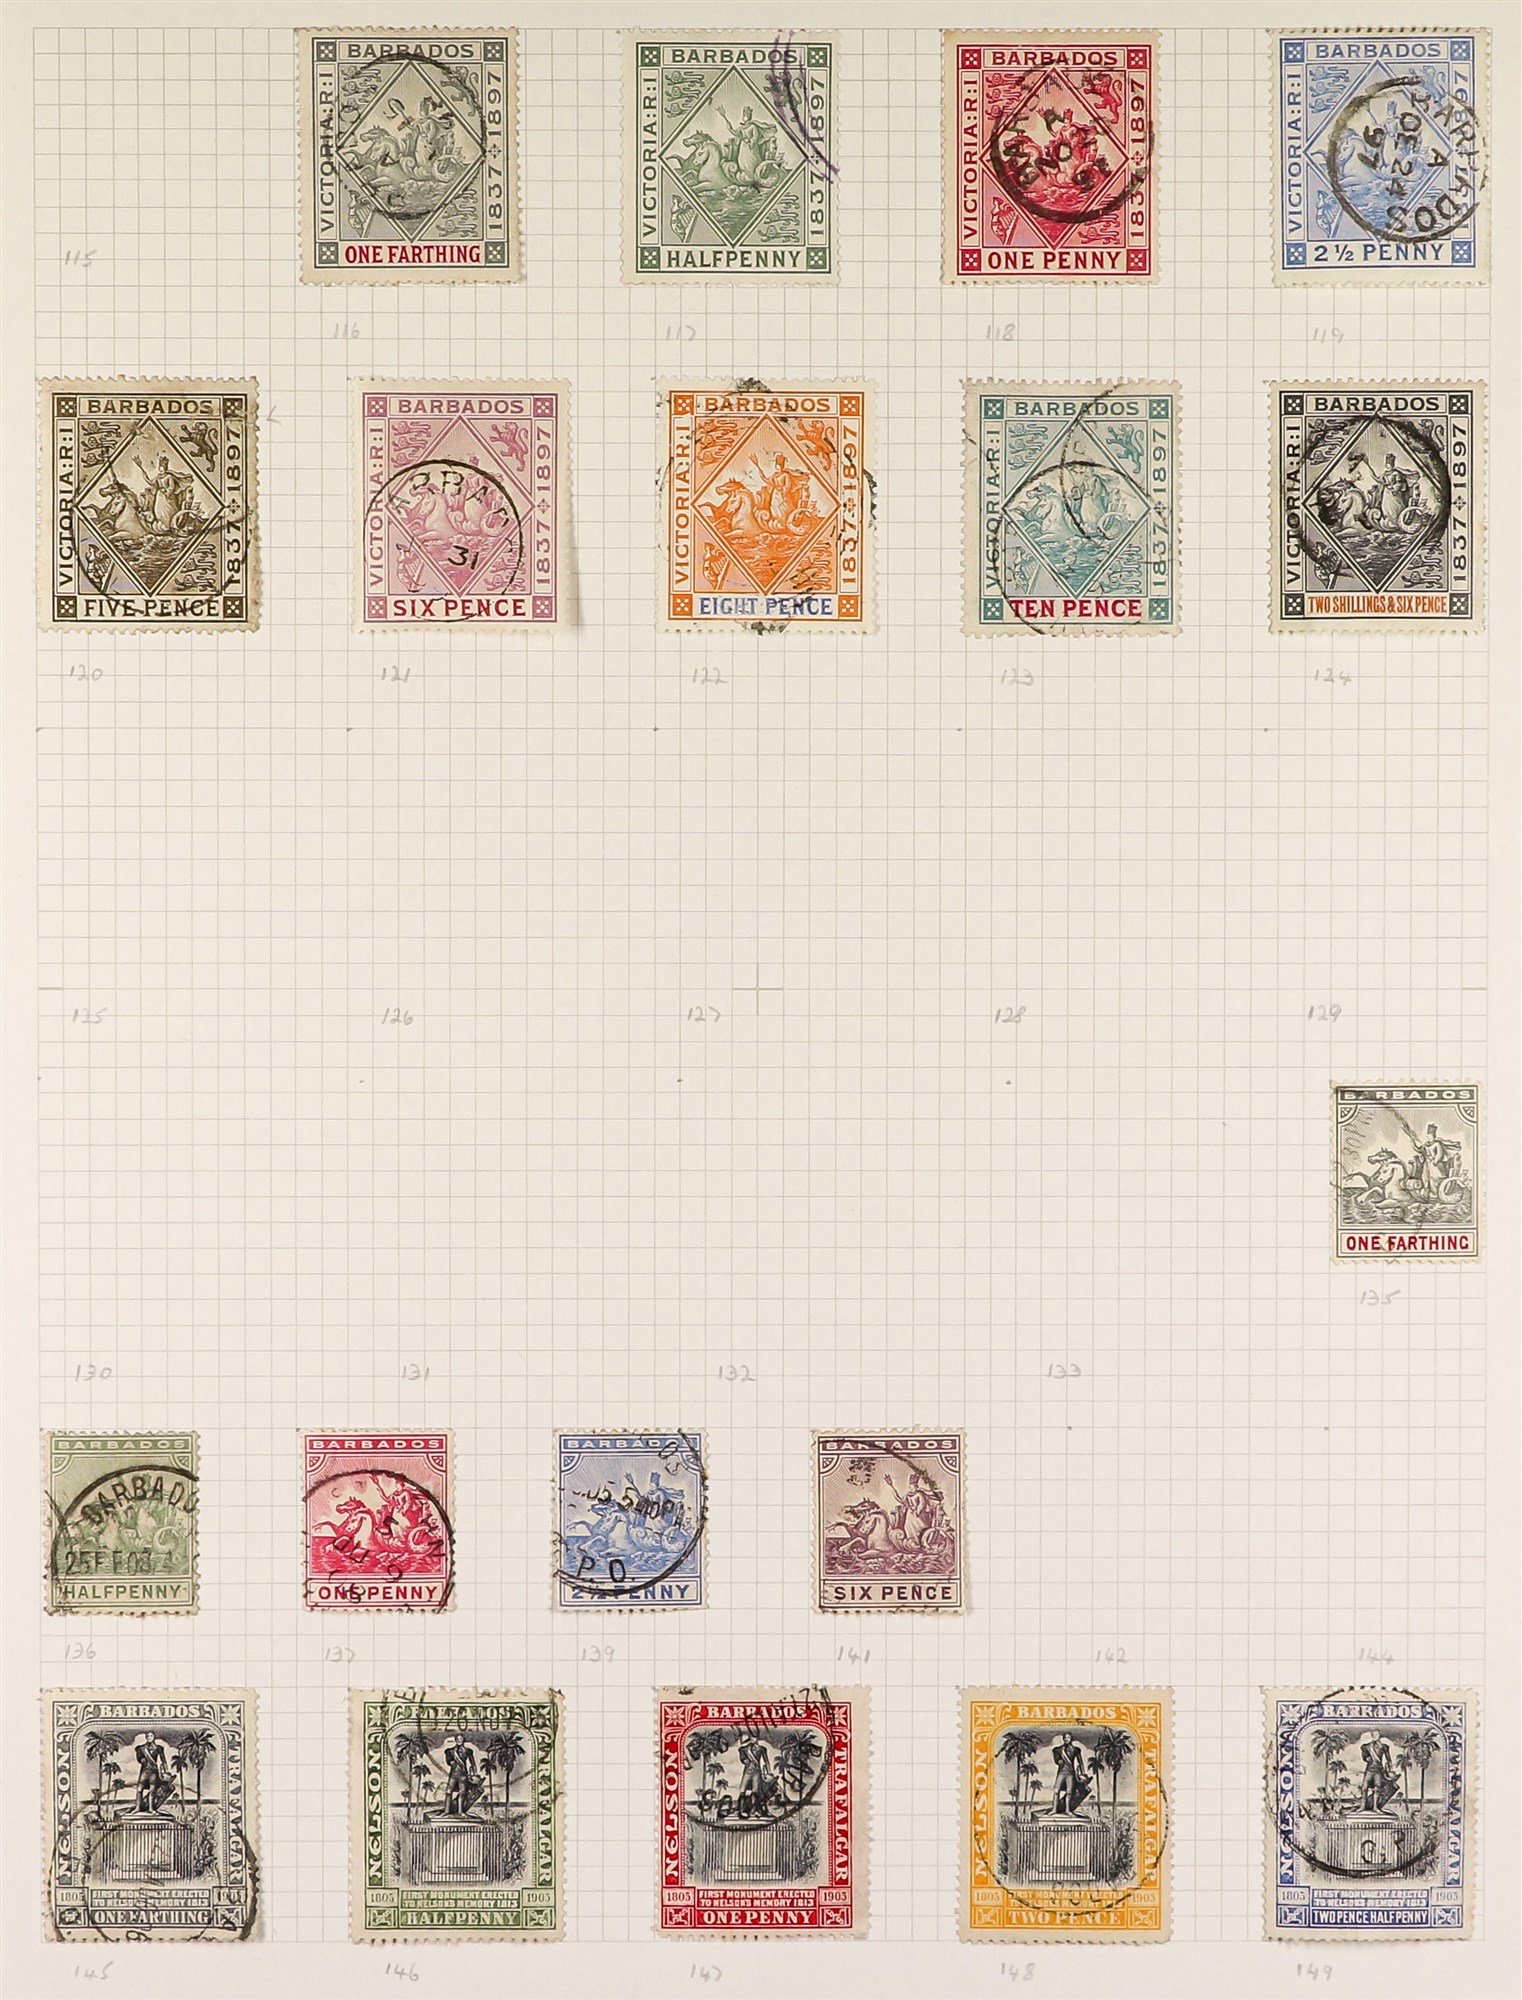 BARBADOS 1852 - 1980 USED COLLECTION of around 500 stamps & miniature sheets in album, comprehensive - Image 4 of 9